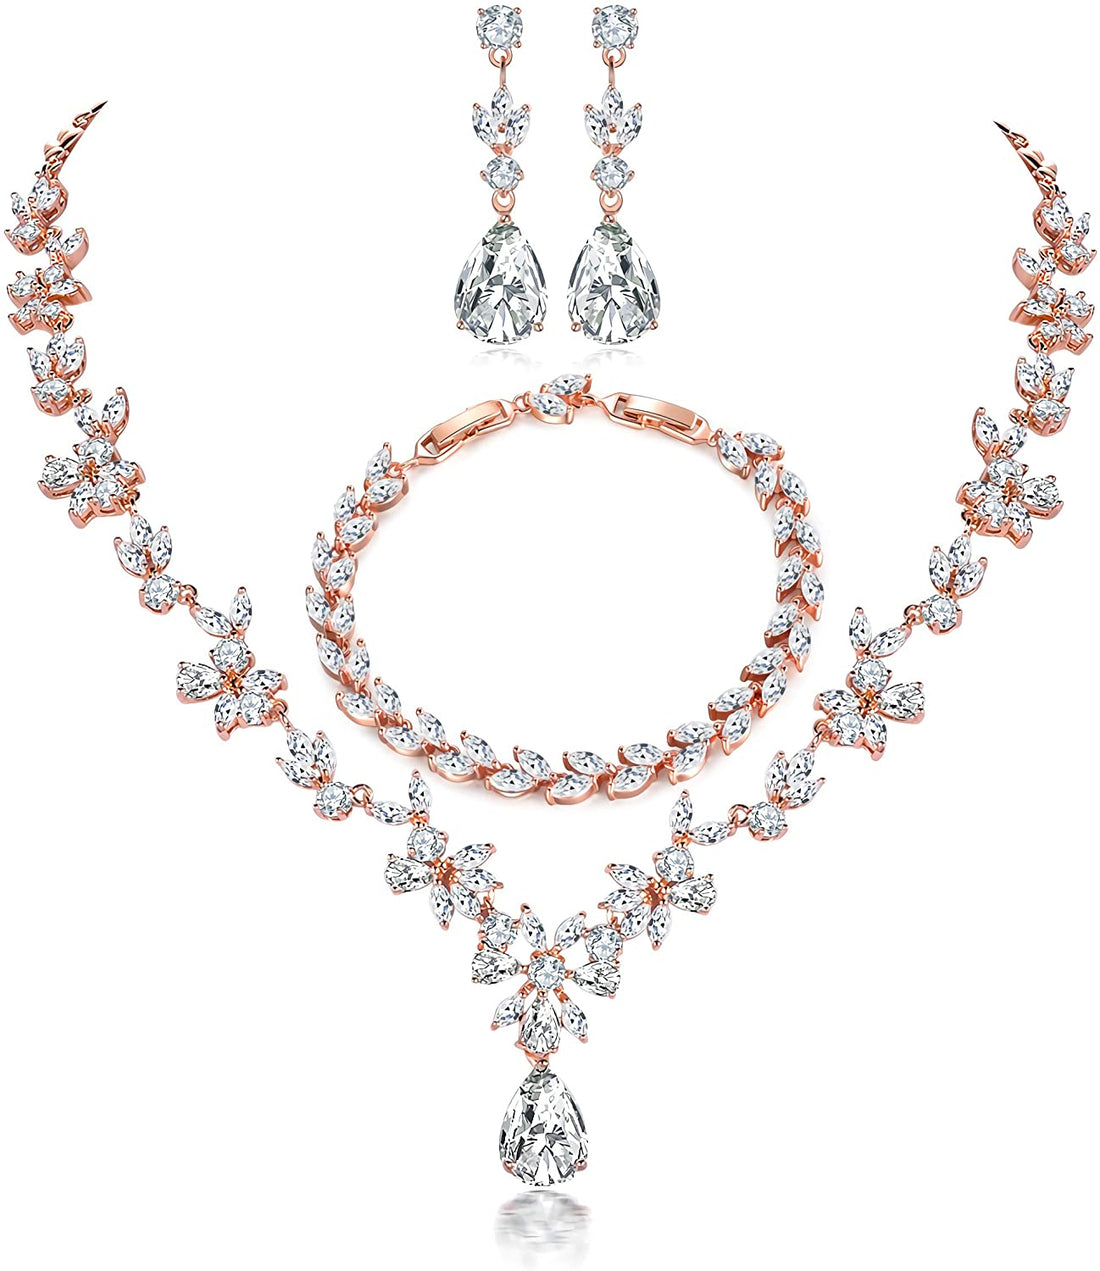 Shiny Rose Gold Plated Bridal Jewelry Necklace &amp; Earrings Set